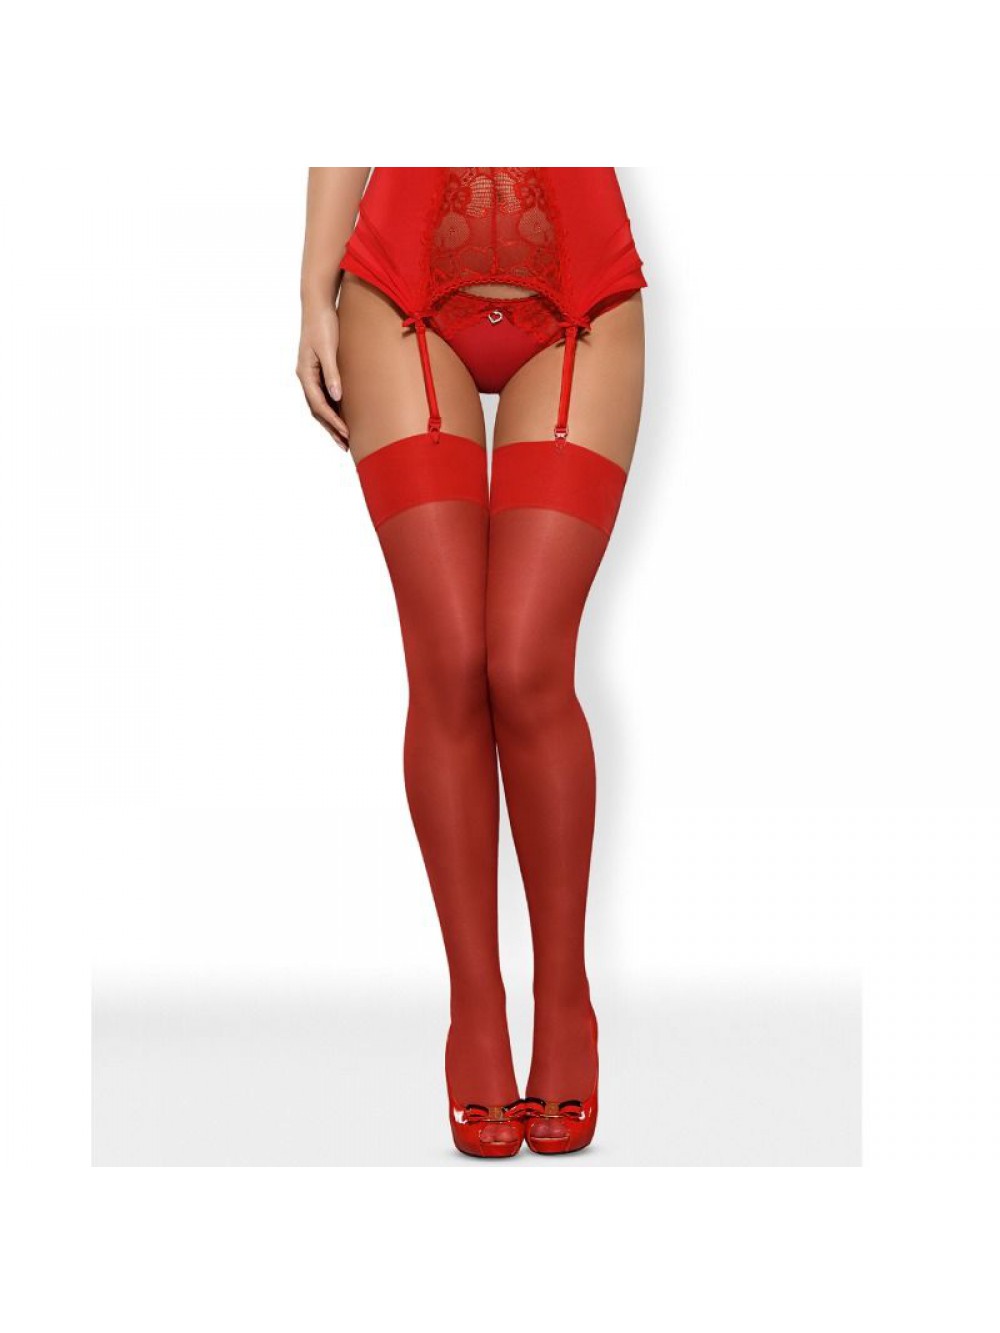 STOCKINGS S800 - RED - S/M